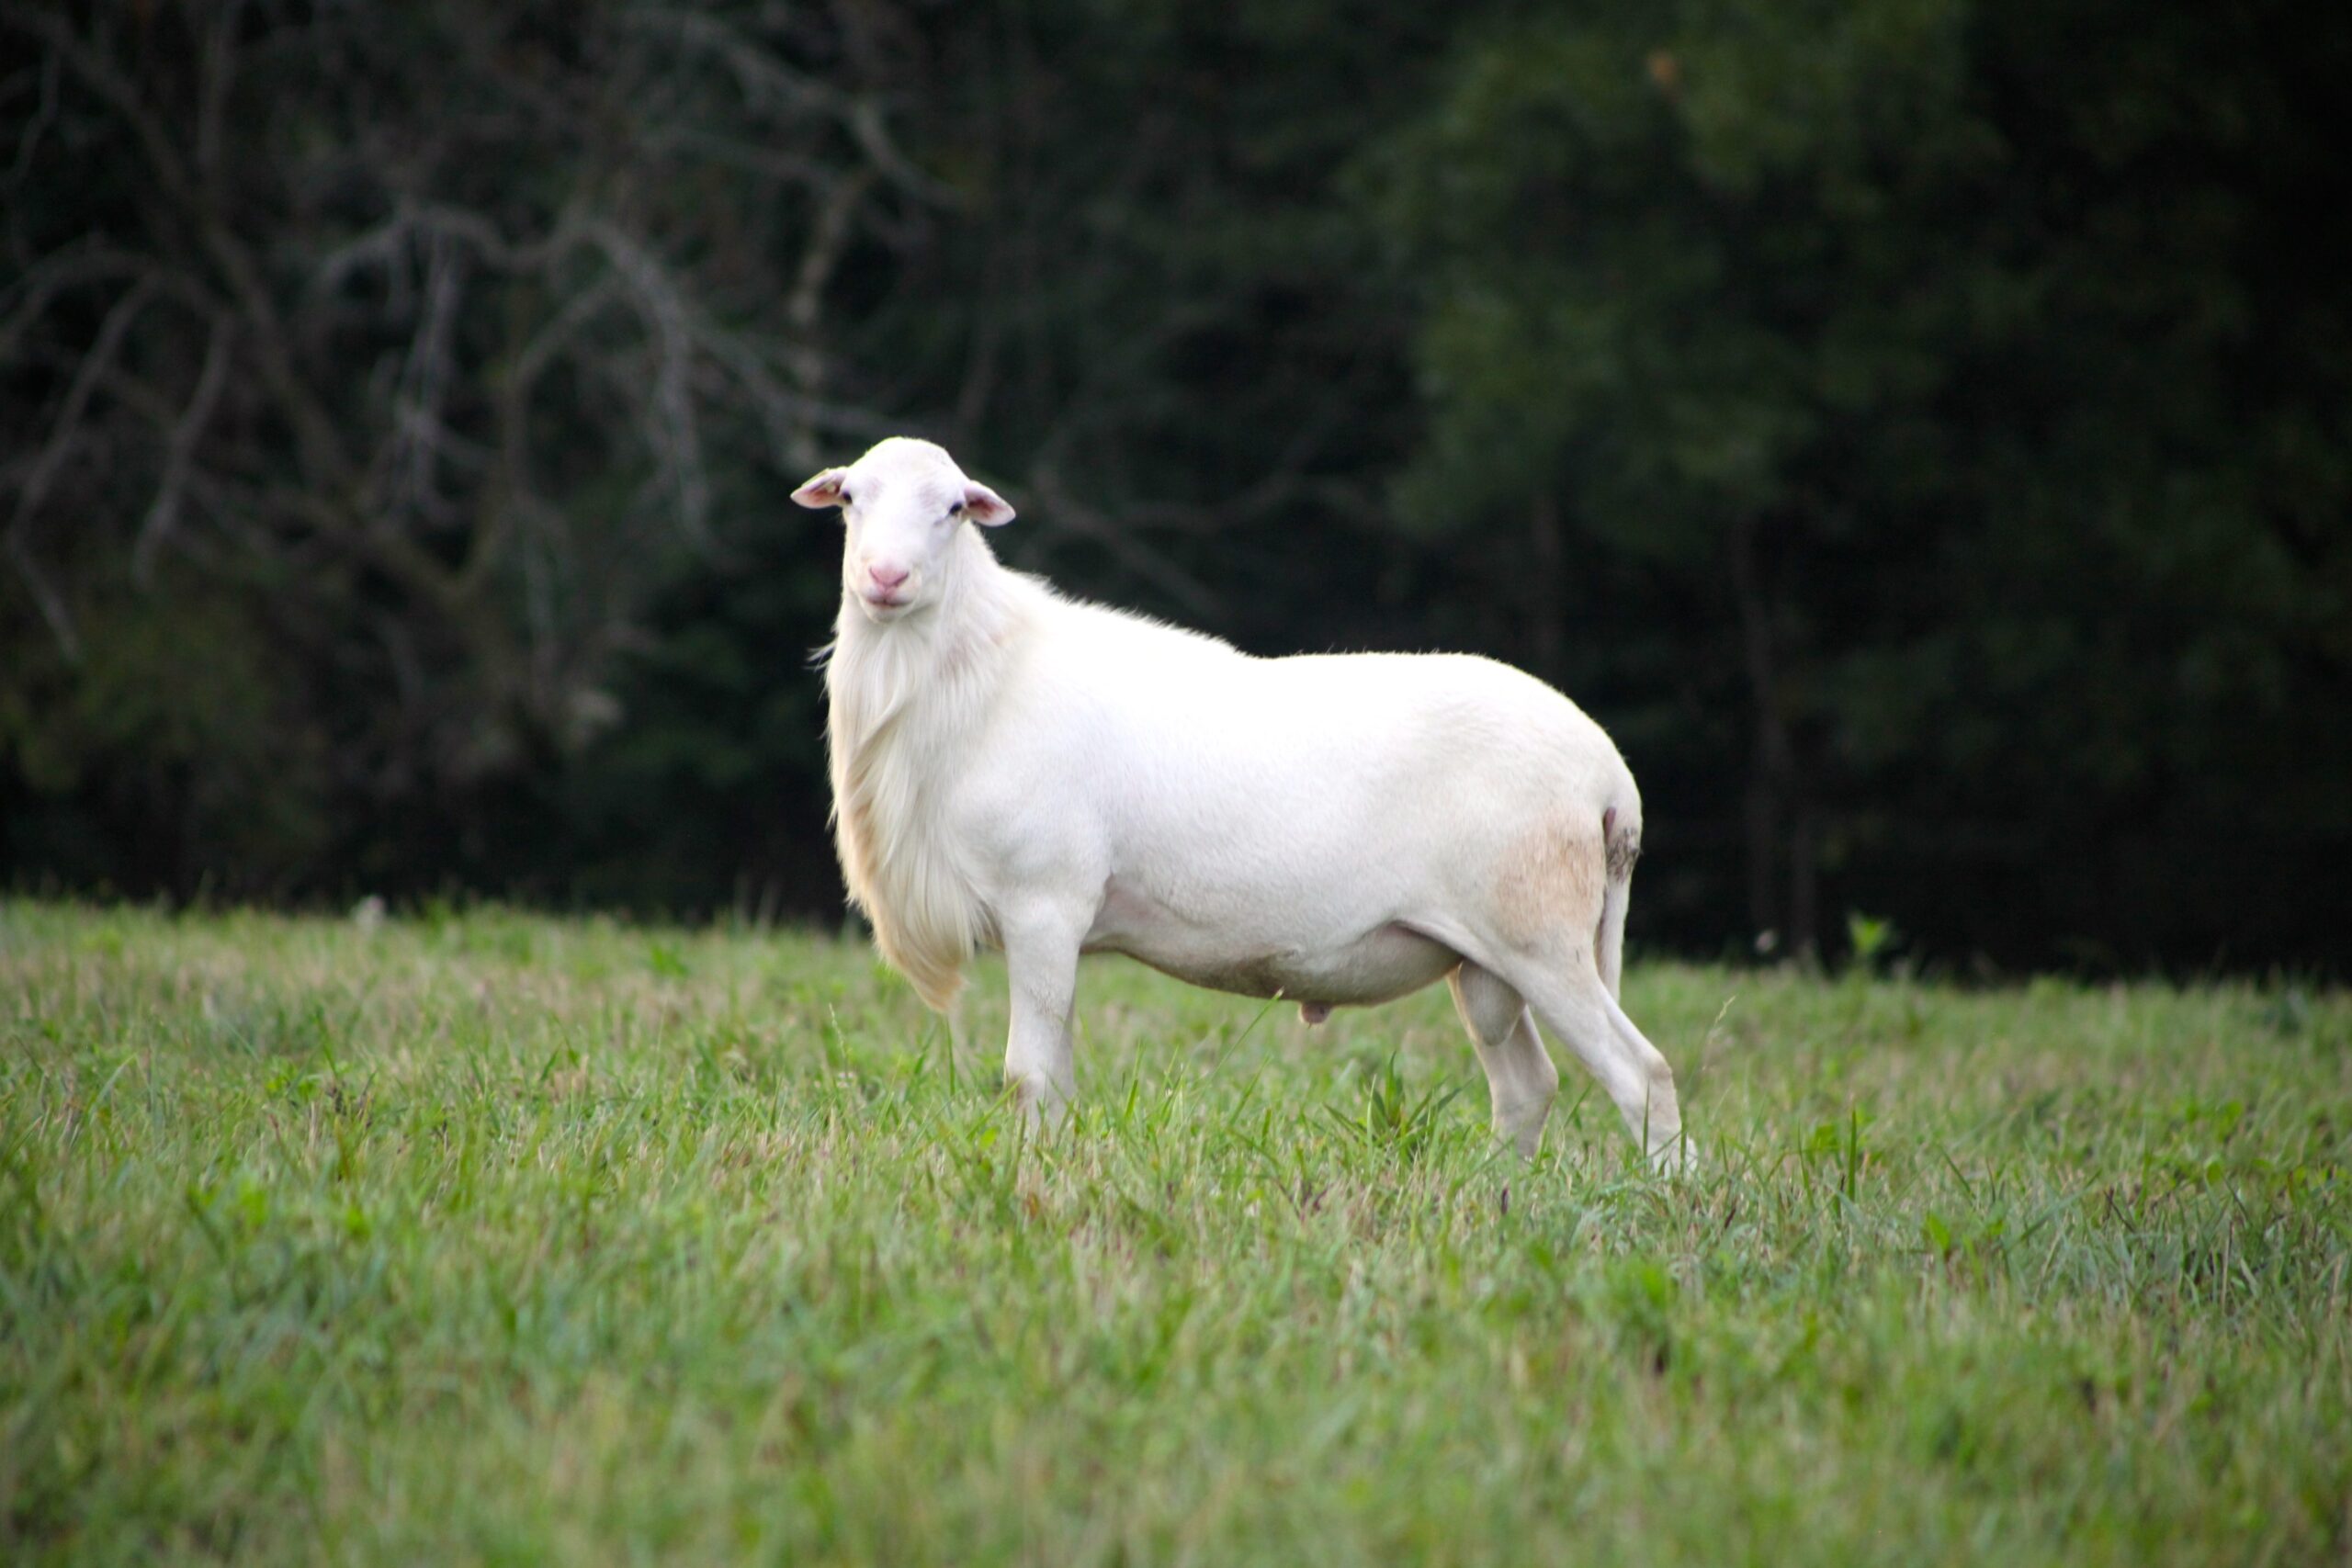 The St. Croix White Hair Sheep a special bred animal on the St. Croix known worldwide for its great resilience to climate change. In fact, the St. Croix White Hair Sheep and the Senepol cattle have been part of the Virgin Islands history since the 1800s. (Photo by Olasee Davis)